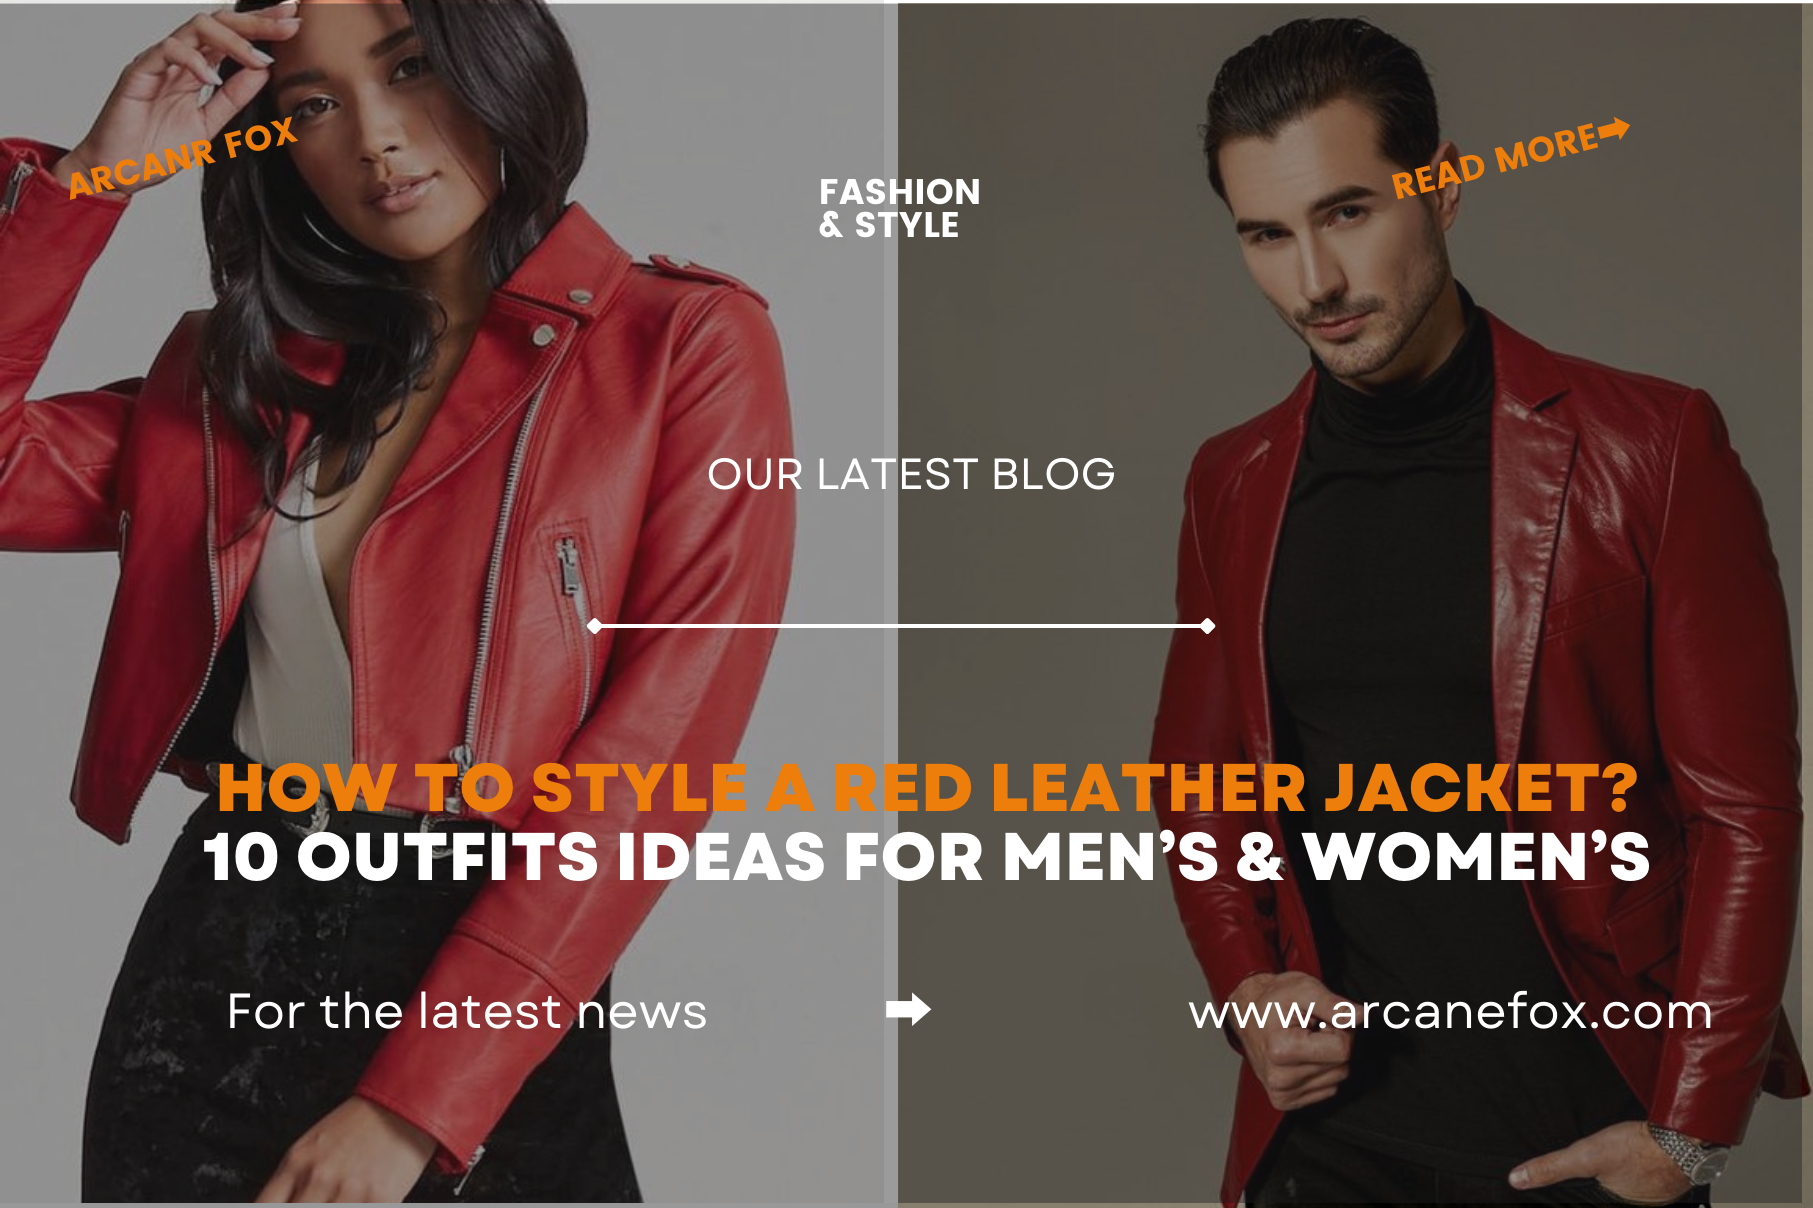 How to Style A Red Leather Jacket? 10 Outfits Ideas for Men’s & Women’s